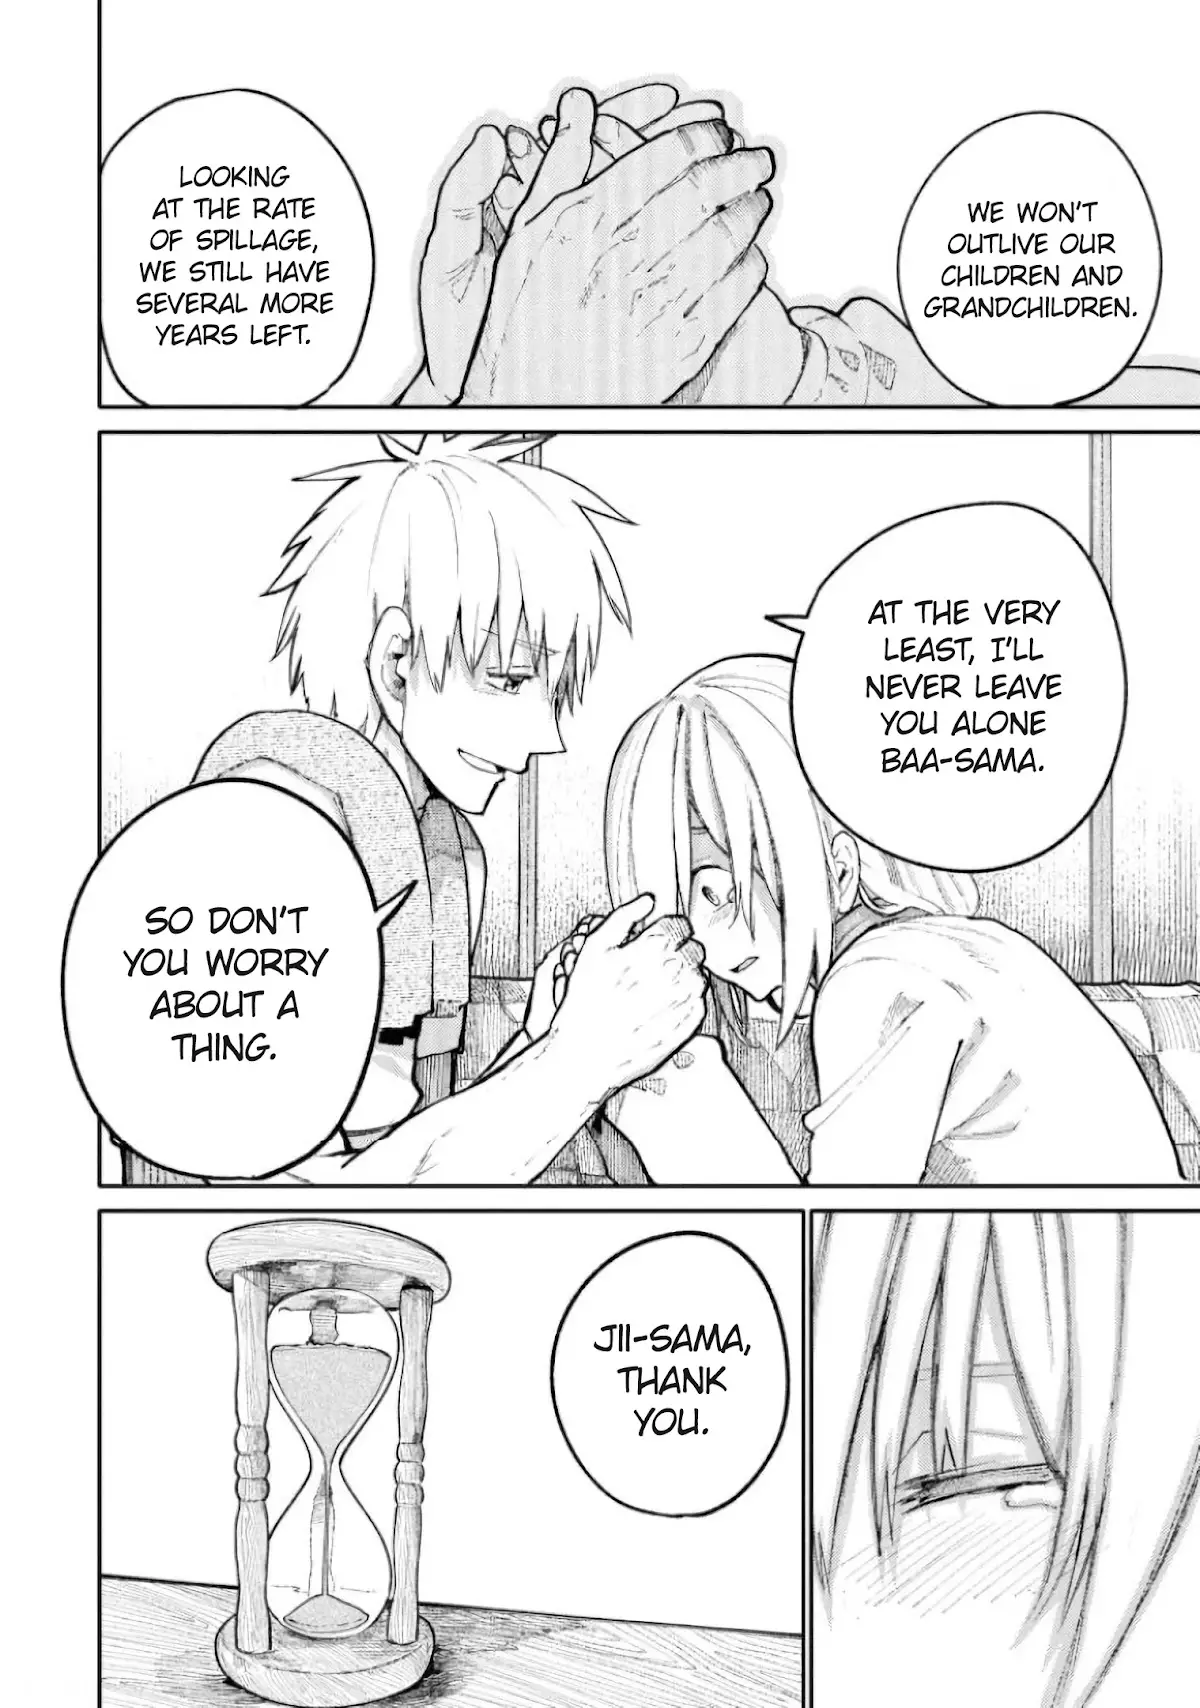 A Story About A Grampa And Granma Returned Back To Their Youth. - 59 page 8-50be0faa